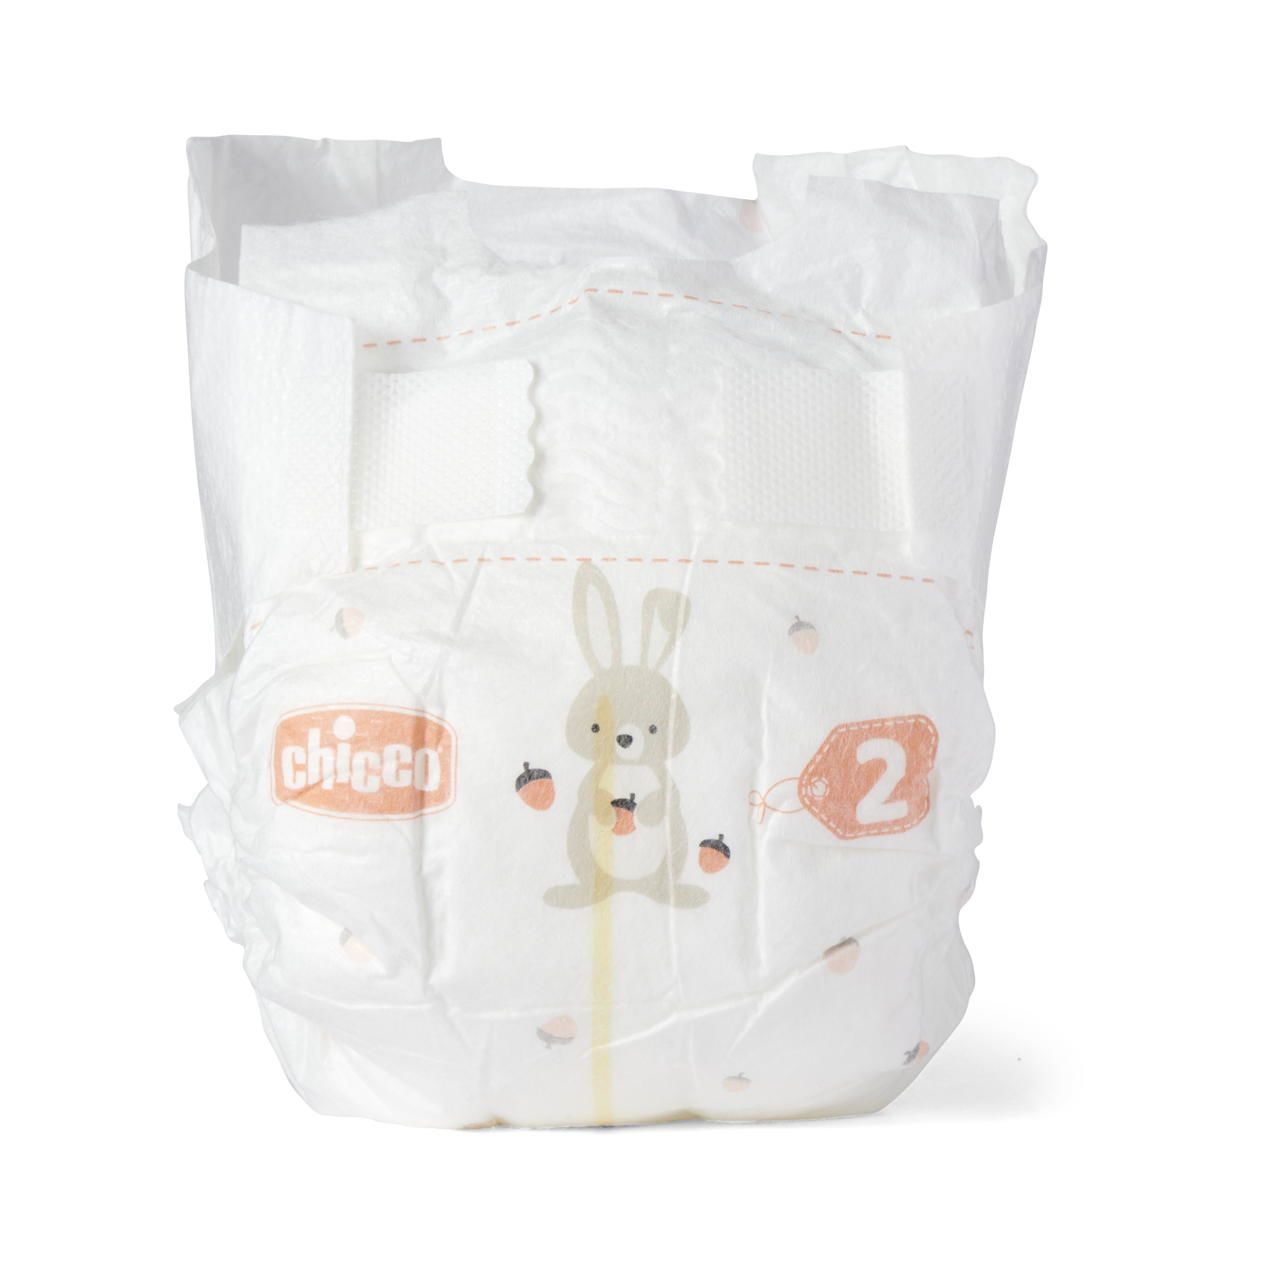 FRALDAS CHICCO AIRY - T2 - 50un image number 3